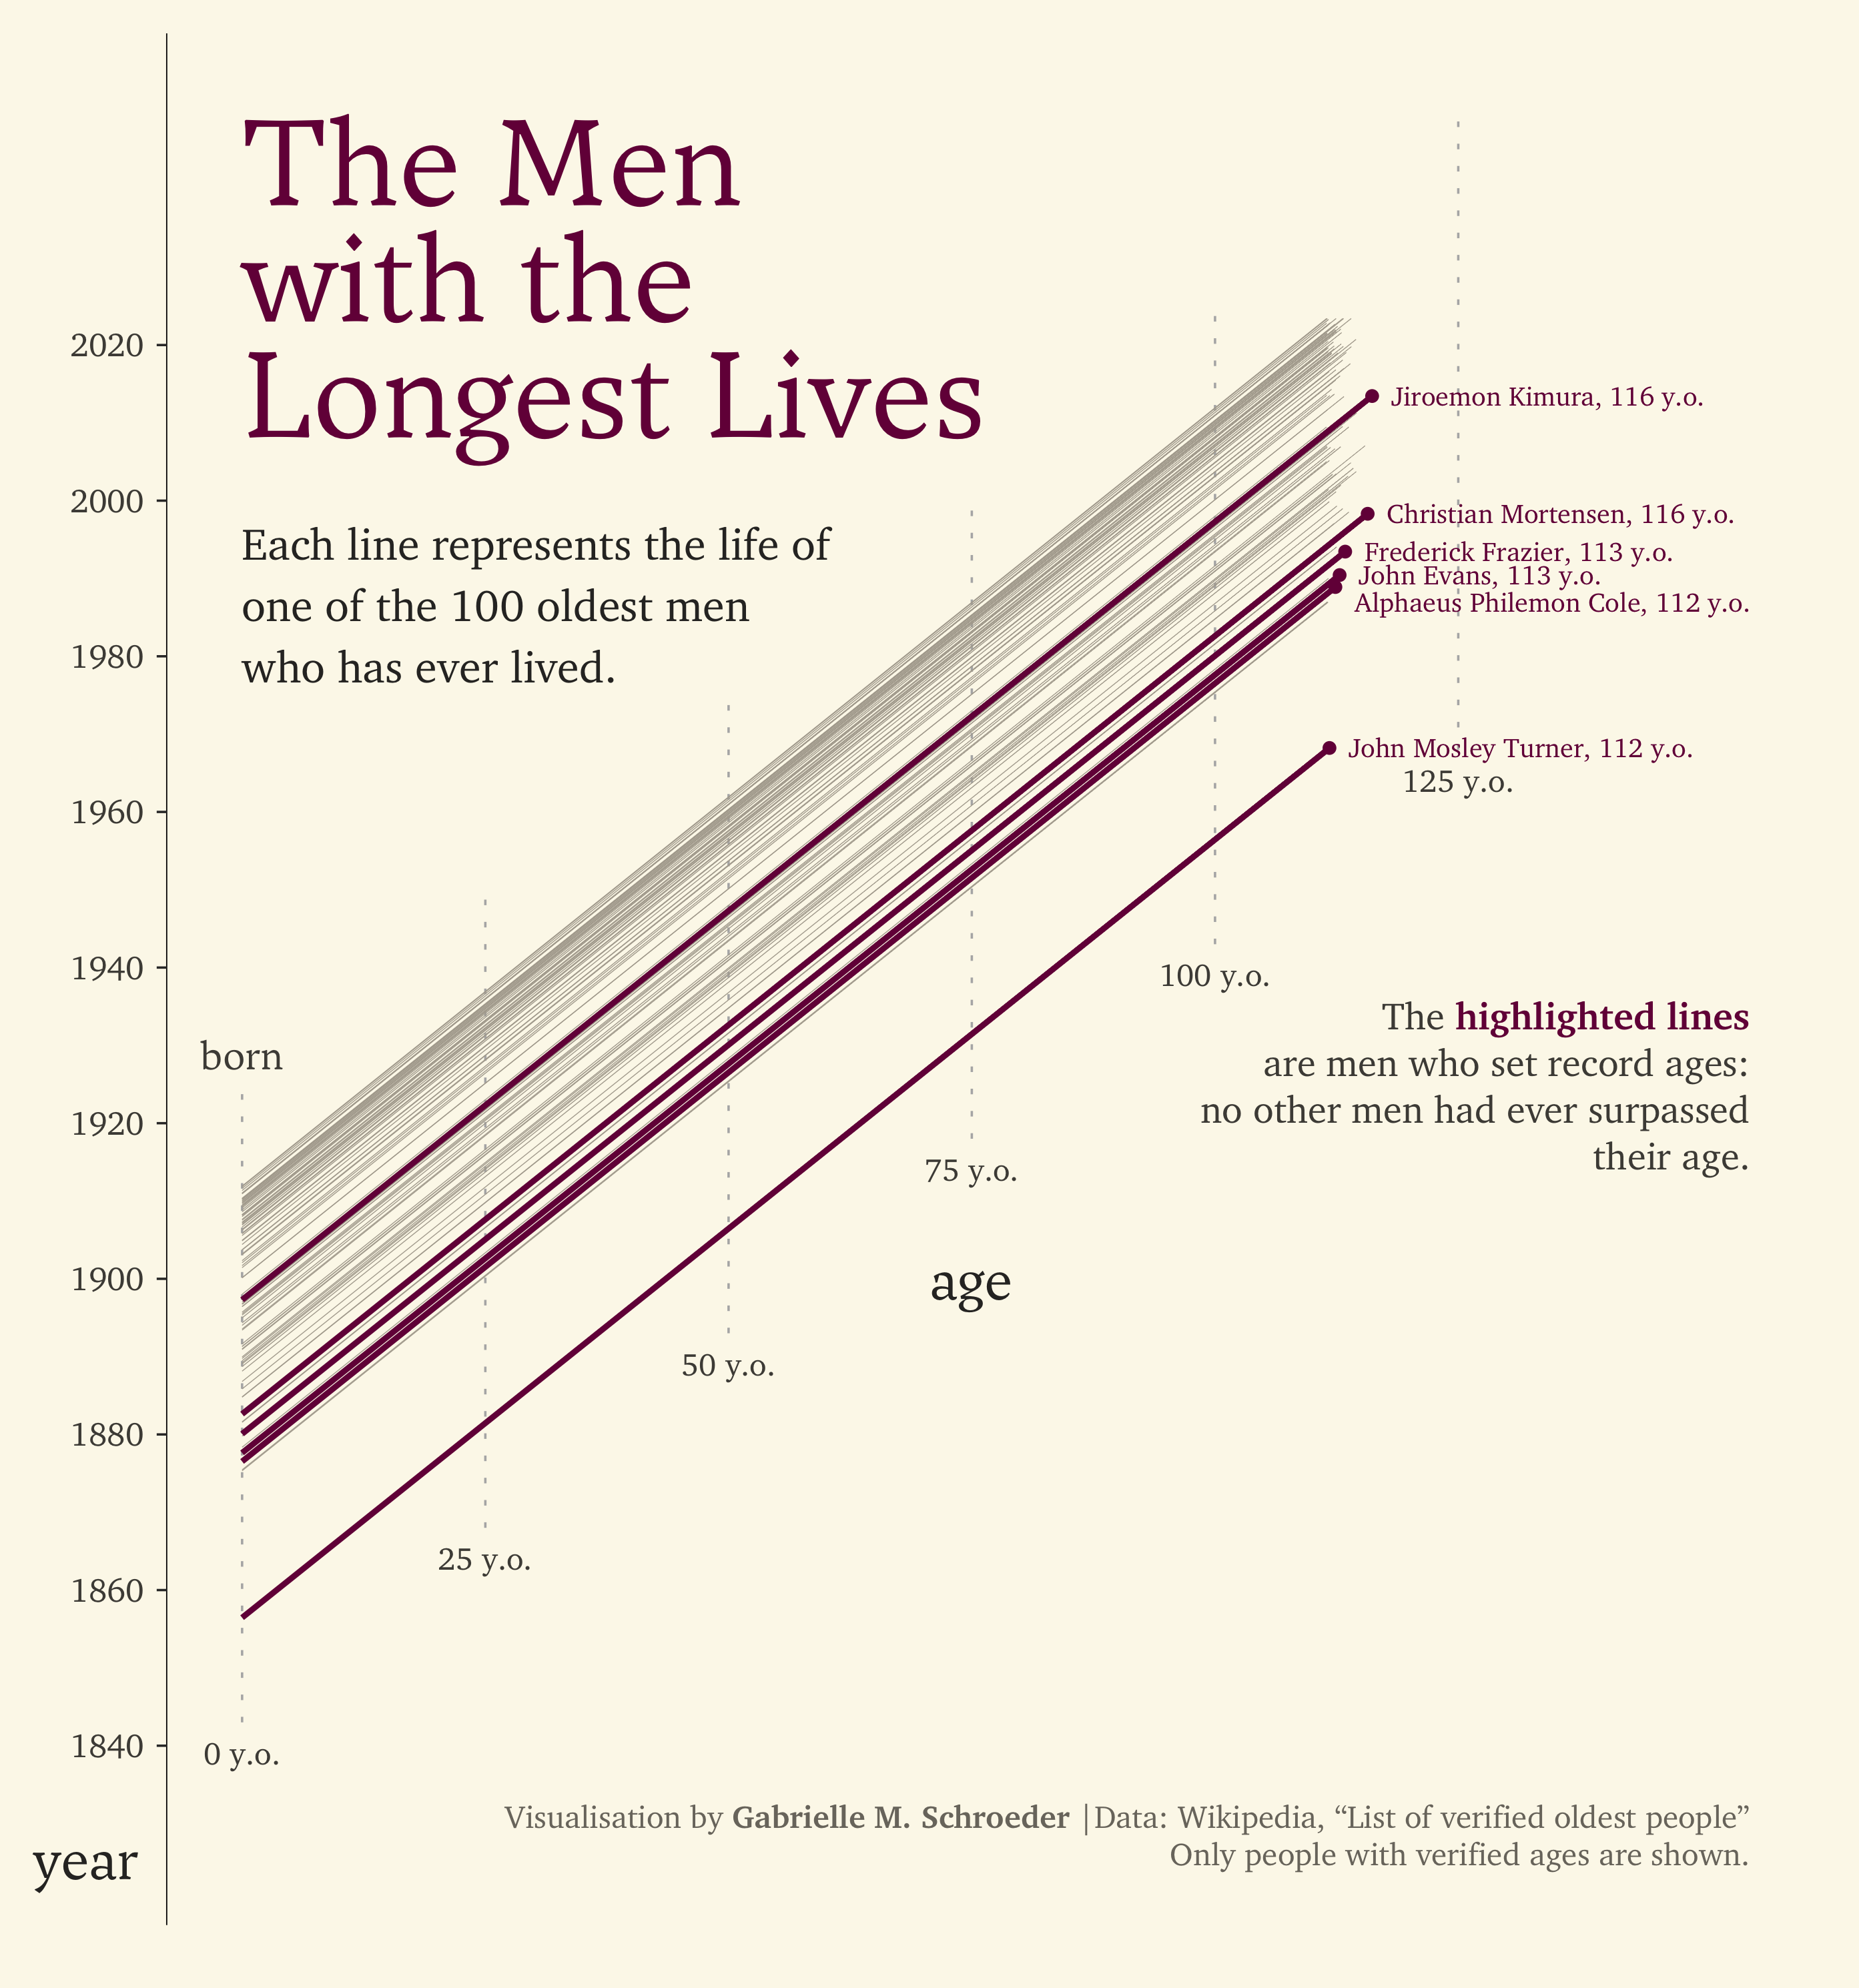 Visualisation of the lives of the 100 verified oldest men who have ever lived. The dates each man lived are plotted versus their ages on each date, creating 100 diagonal lines representing the 100 lives. The lines of the six men who set record ages (at the time of their death) are highlighted in purple. The oldest man who ever lived is Jiroemon Kimura, who died in 2013 at 116 years old.